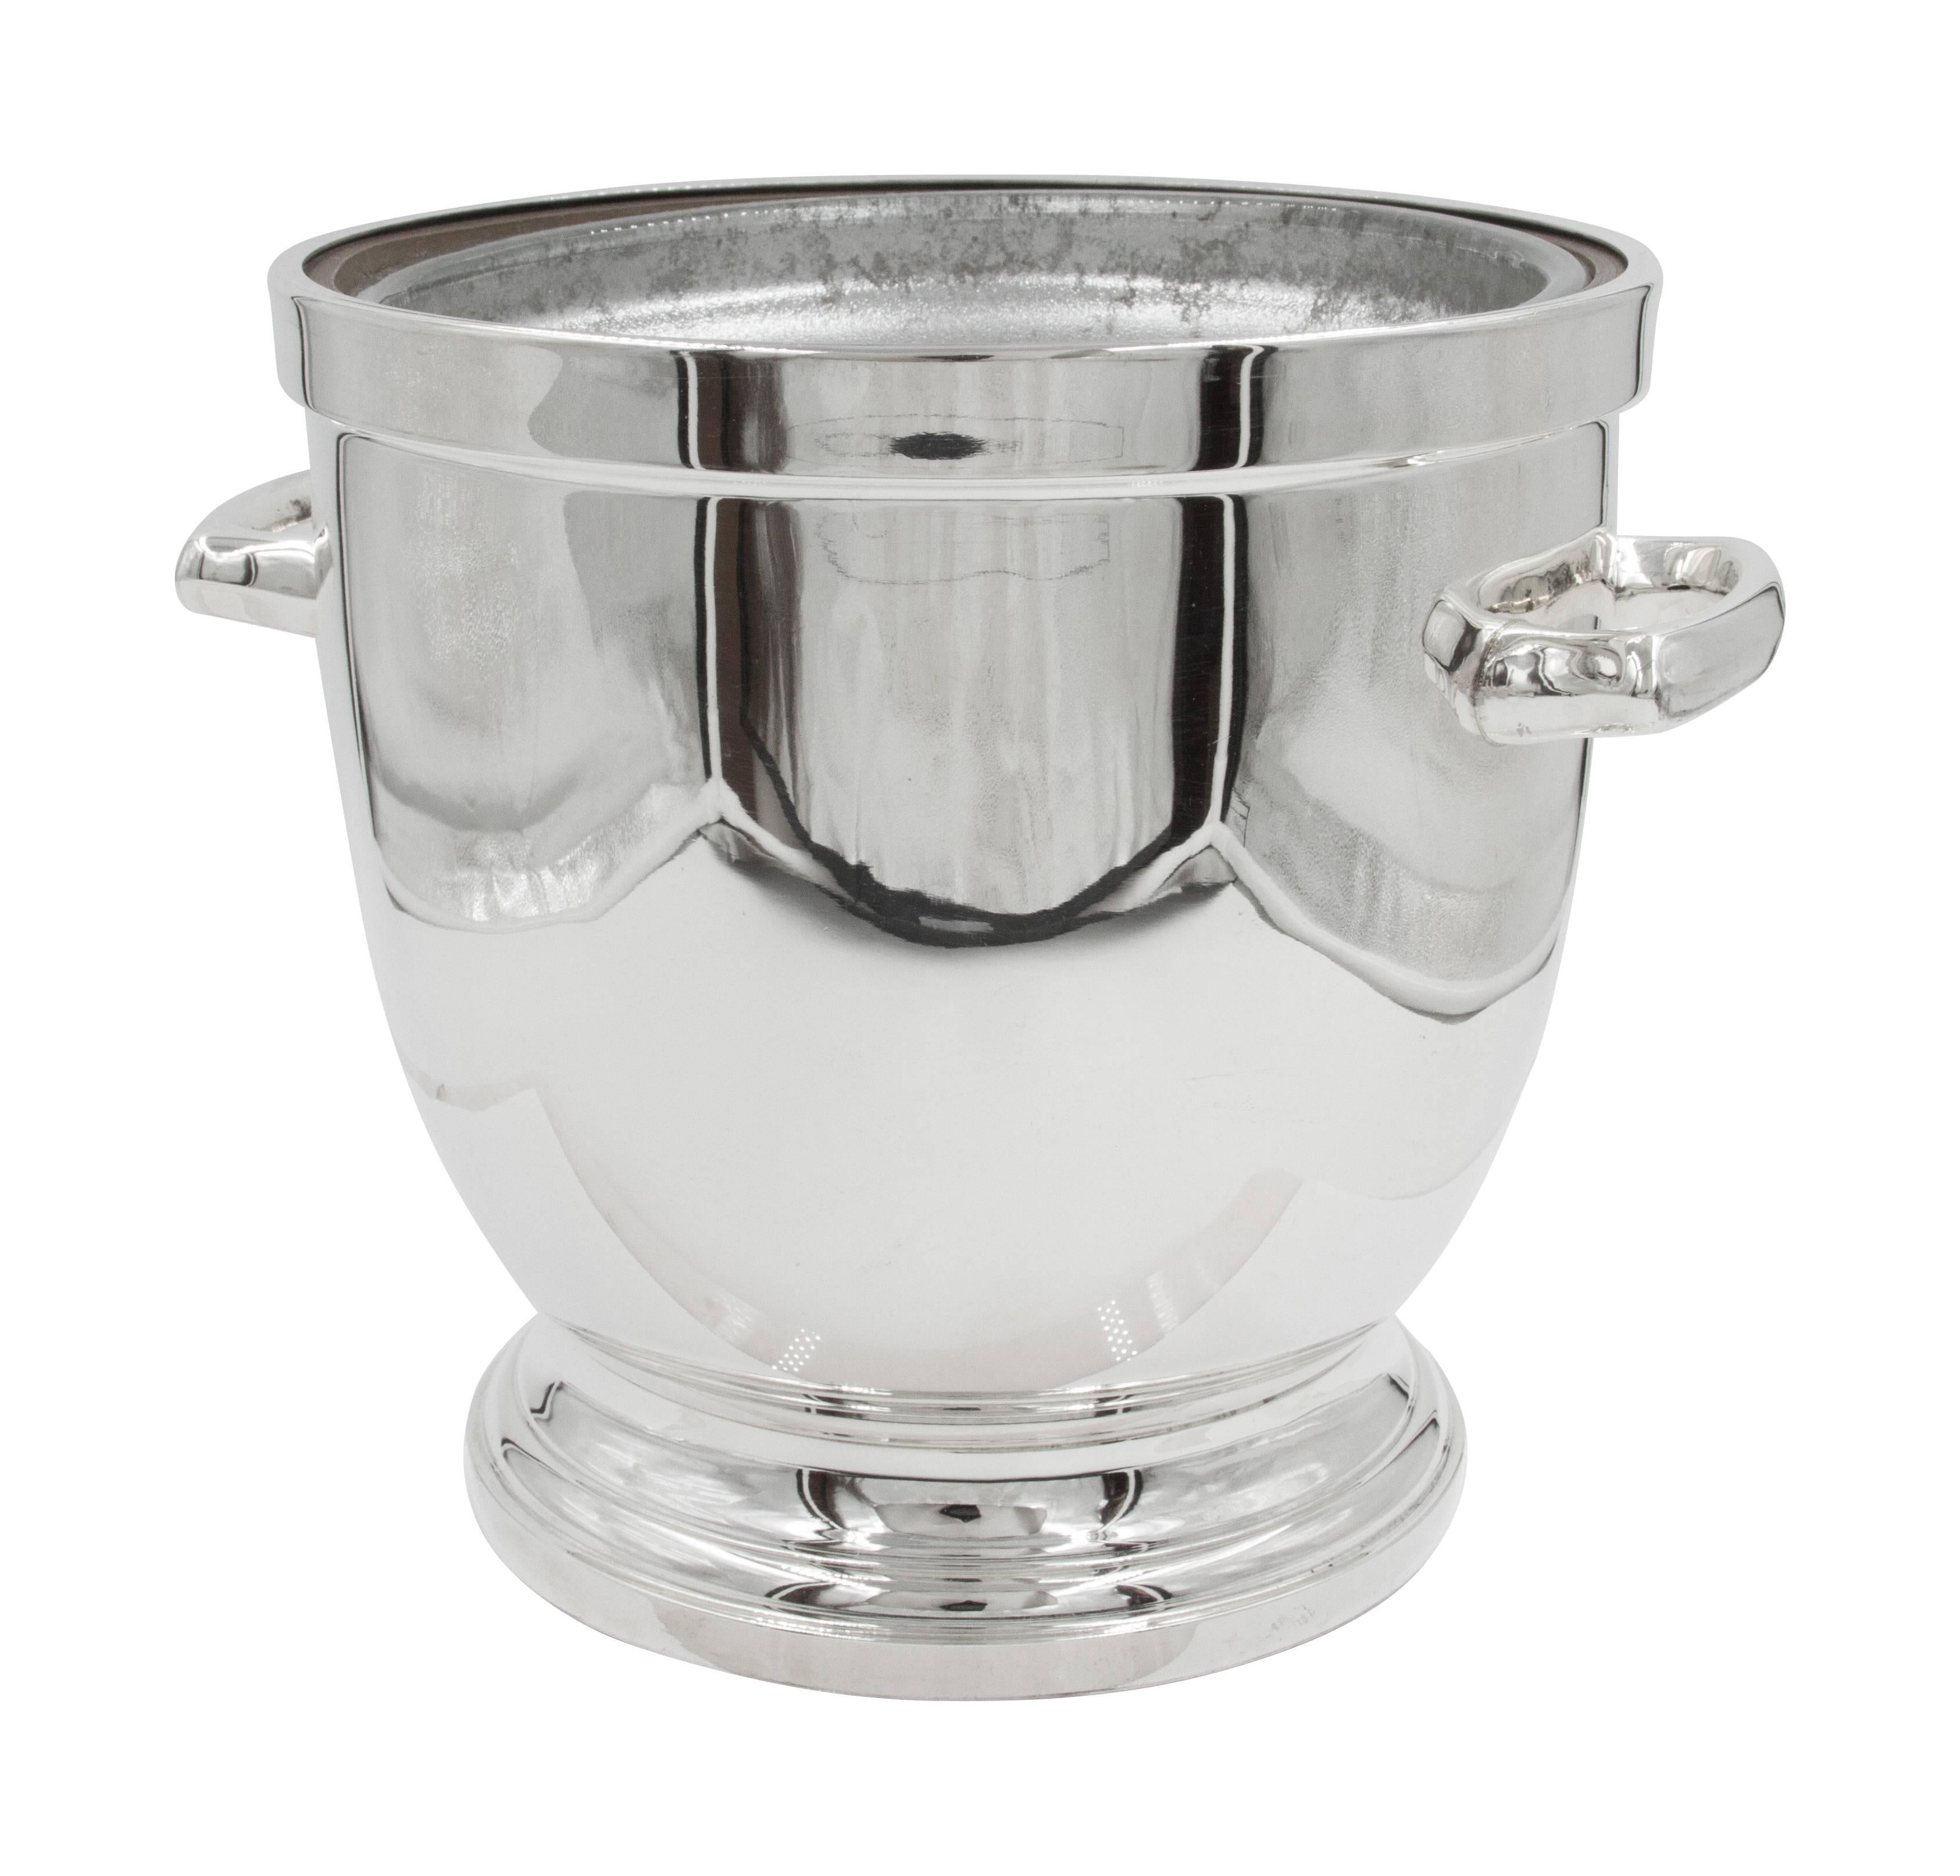 This Mid-Century Modern ice bucket is super sleek and quintessential of that period (Mid-Century). Great for entertaining; would look great on your bar or server.